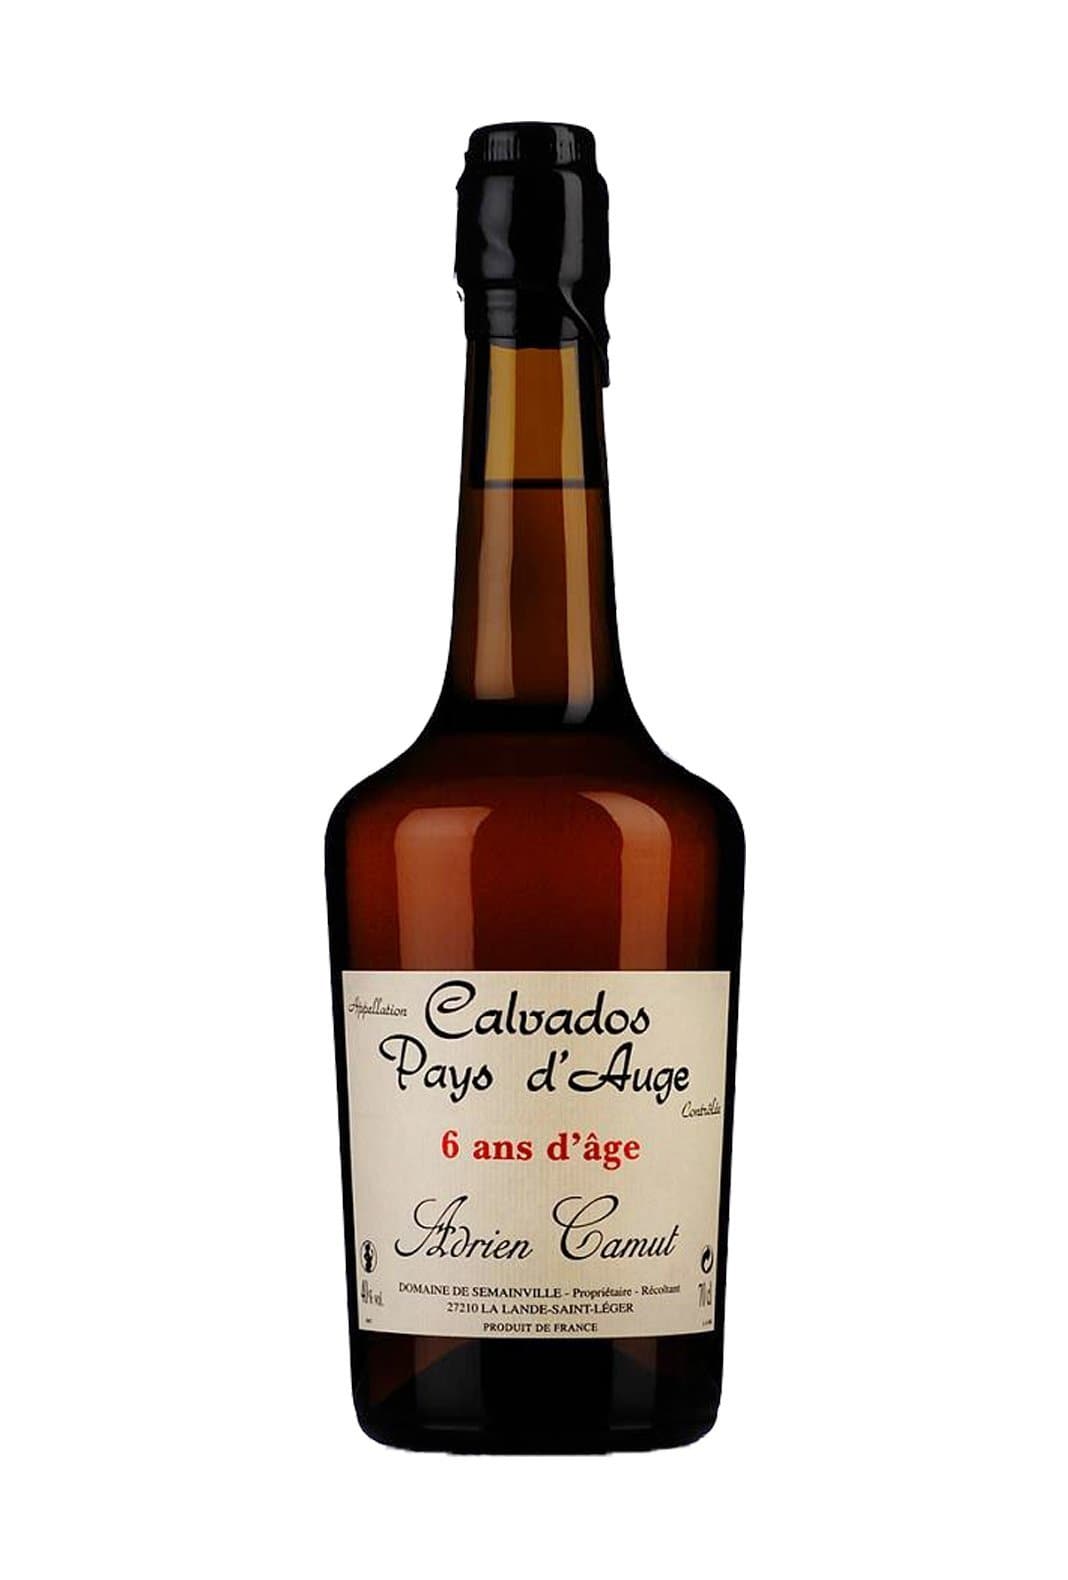 Adrien Camut Calvados 6 years Pays D'Auge 43% 700ml | Brandy | Shop online at Spirits of France